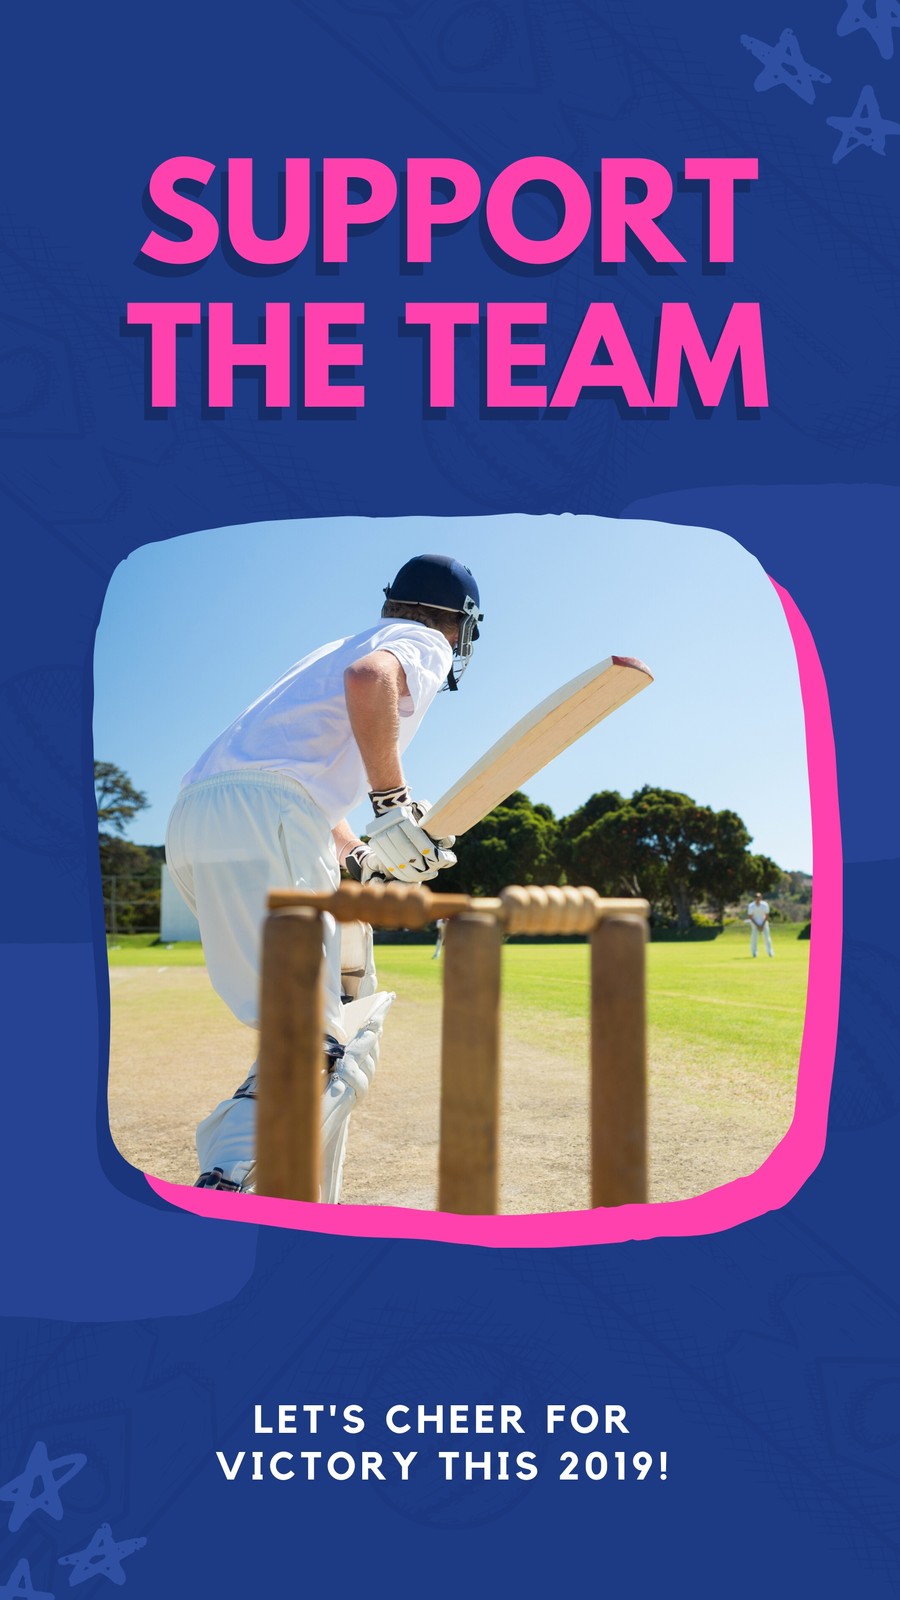 Free and customizable cricket templates